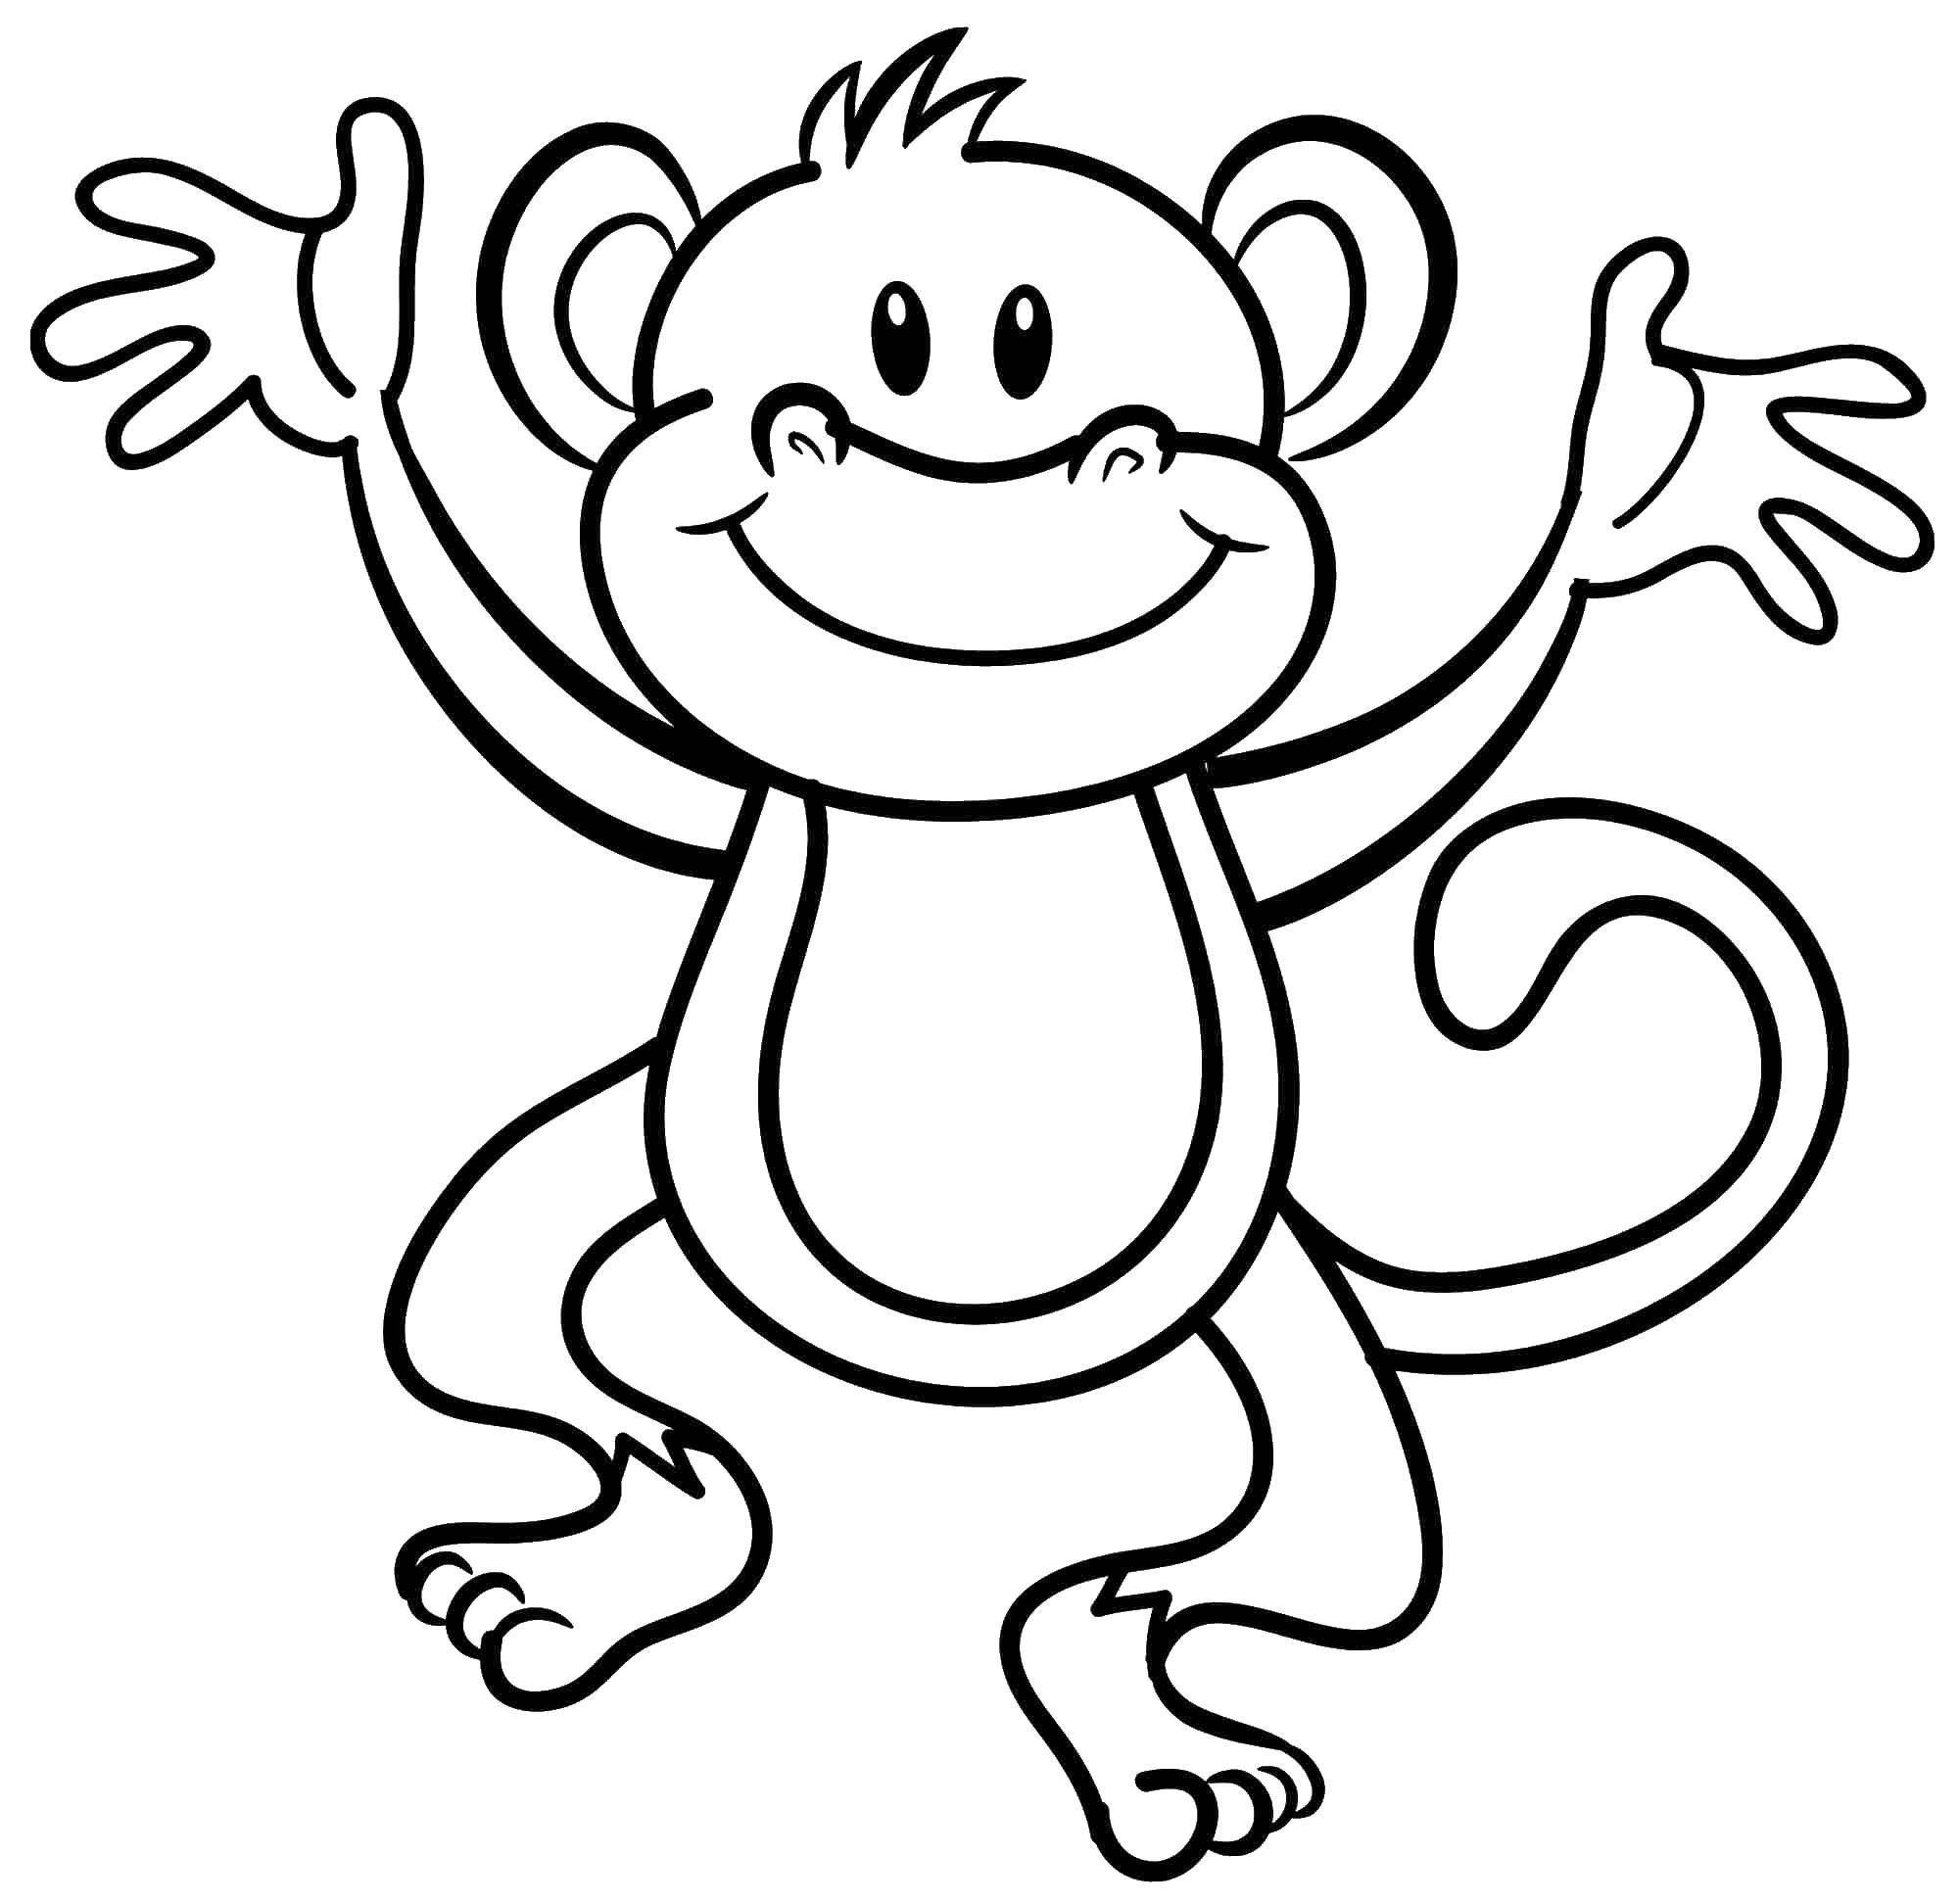 Coloring Good monkey. Category APE. Tags:  monkeys, apes, animals.